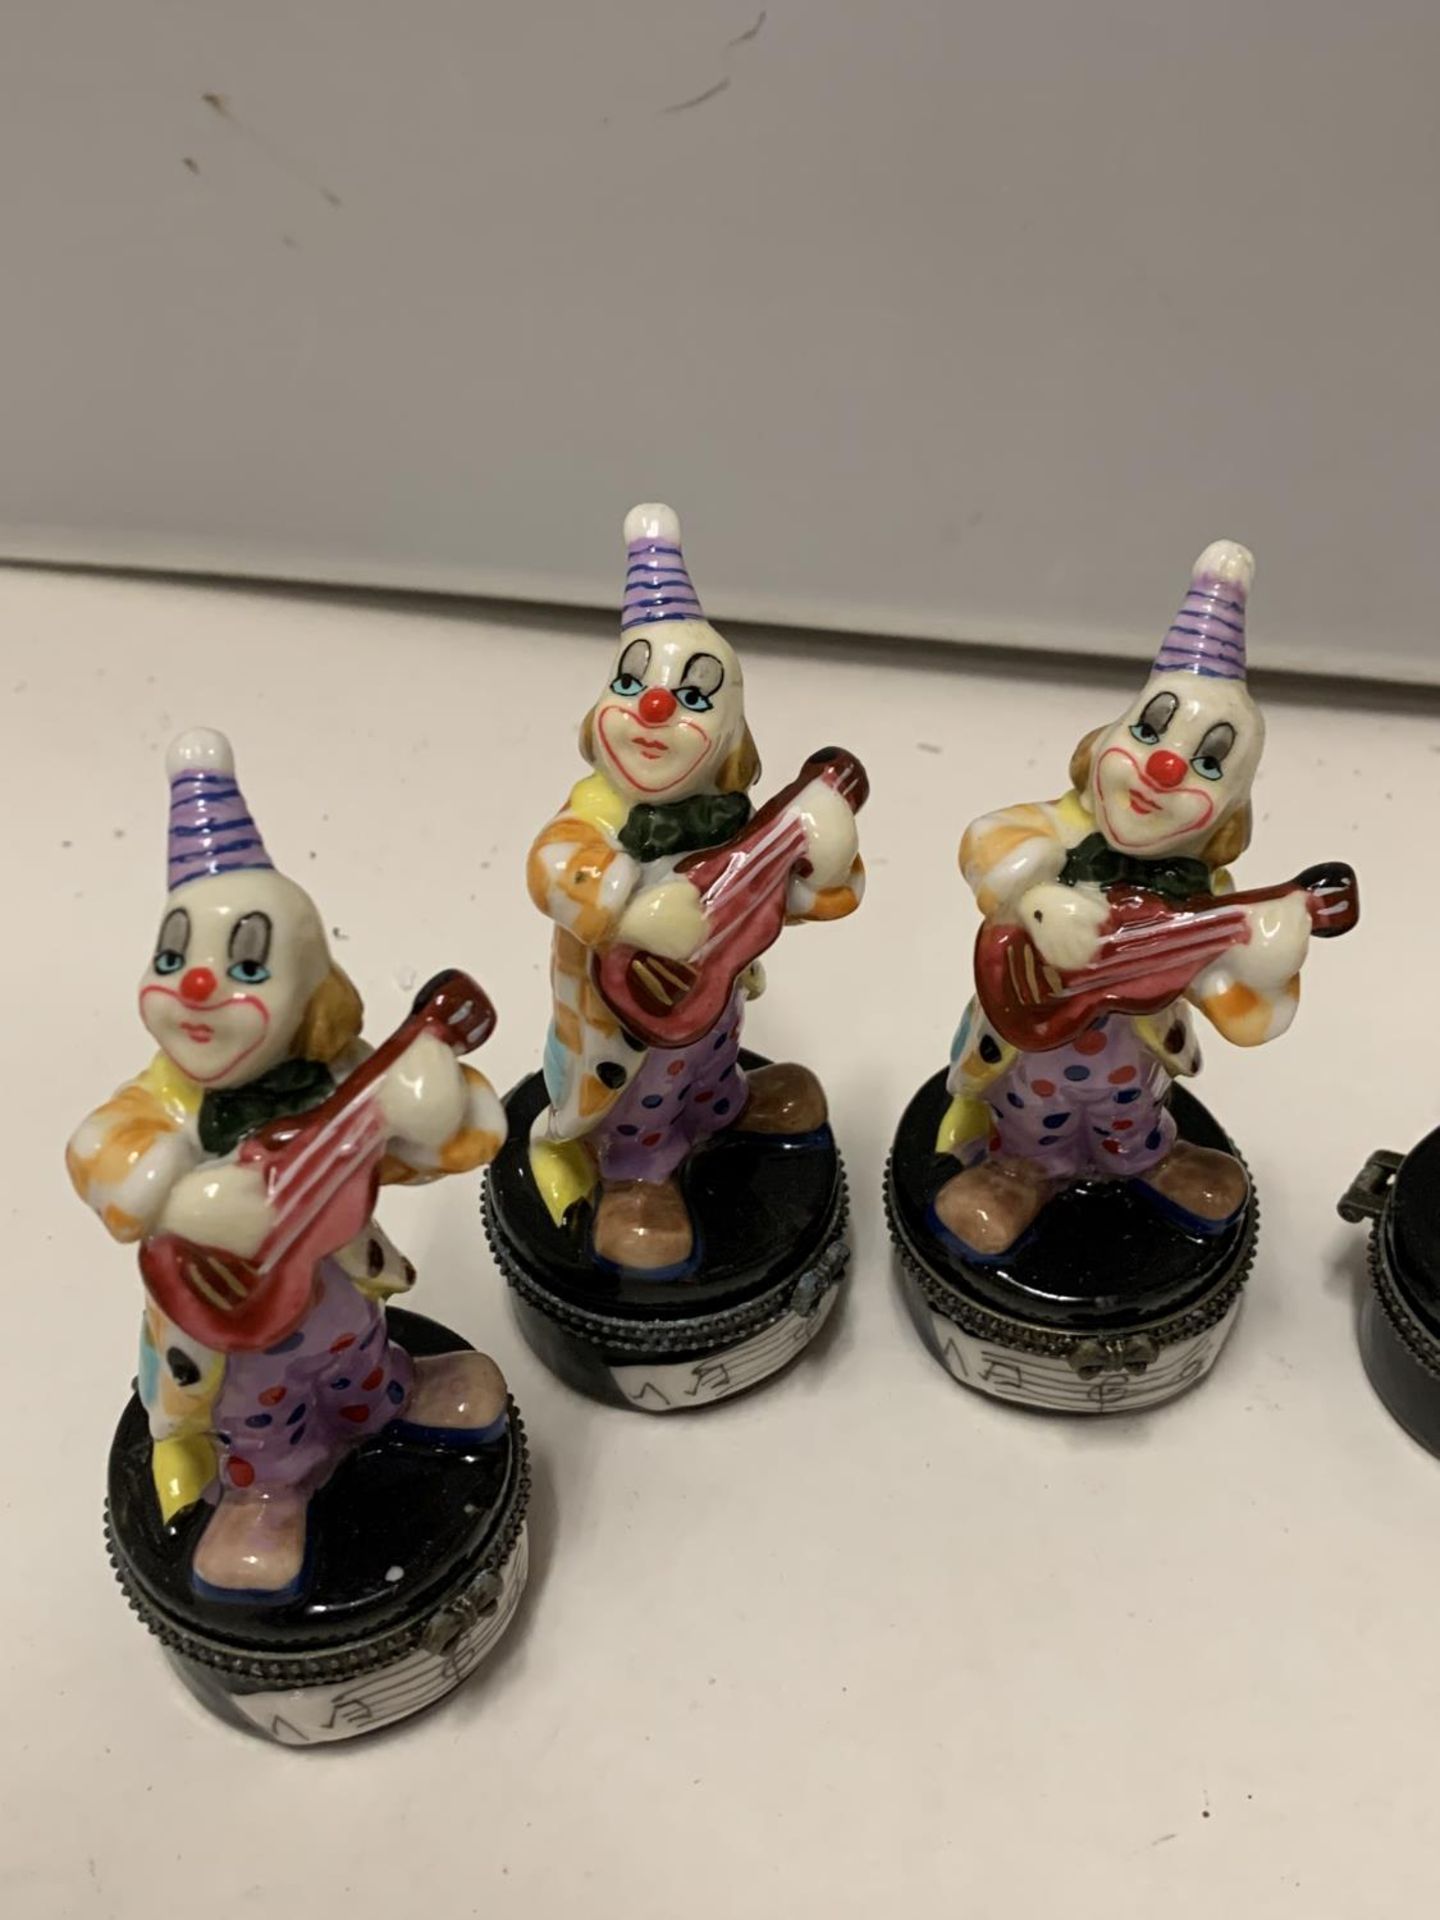 SIX TRINKET BOXES EACH WITH A GLASS CLOWN PLAYING GUITAR FIGURE - Image 3 of 3